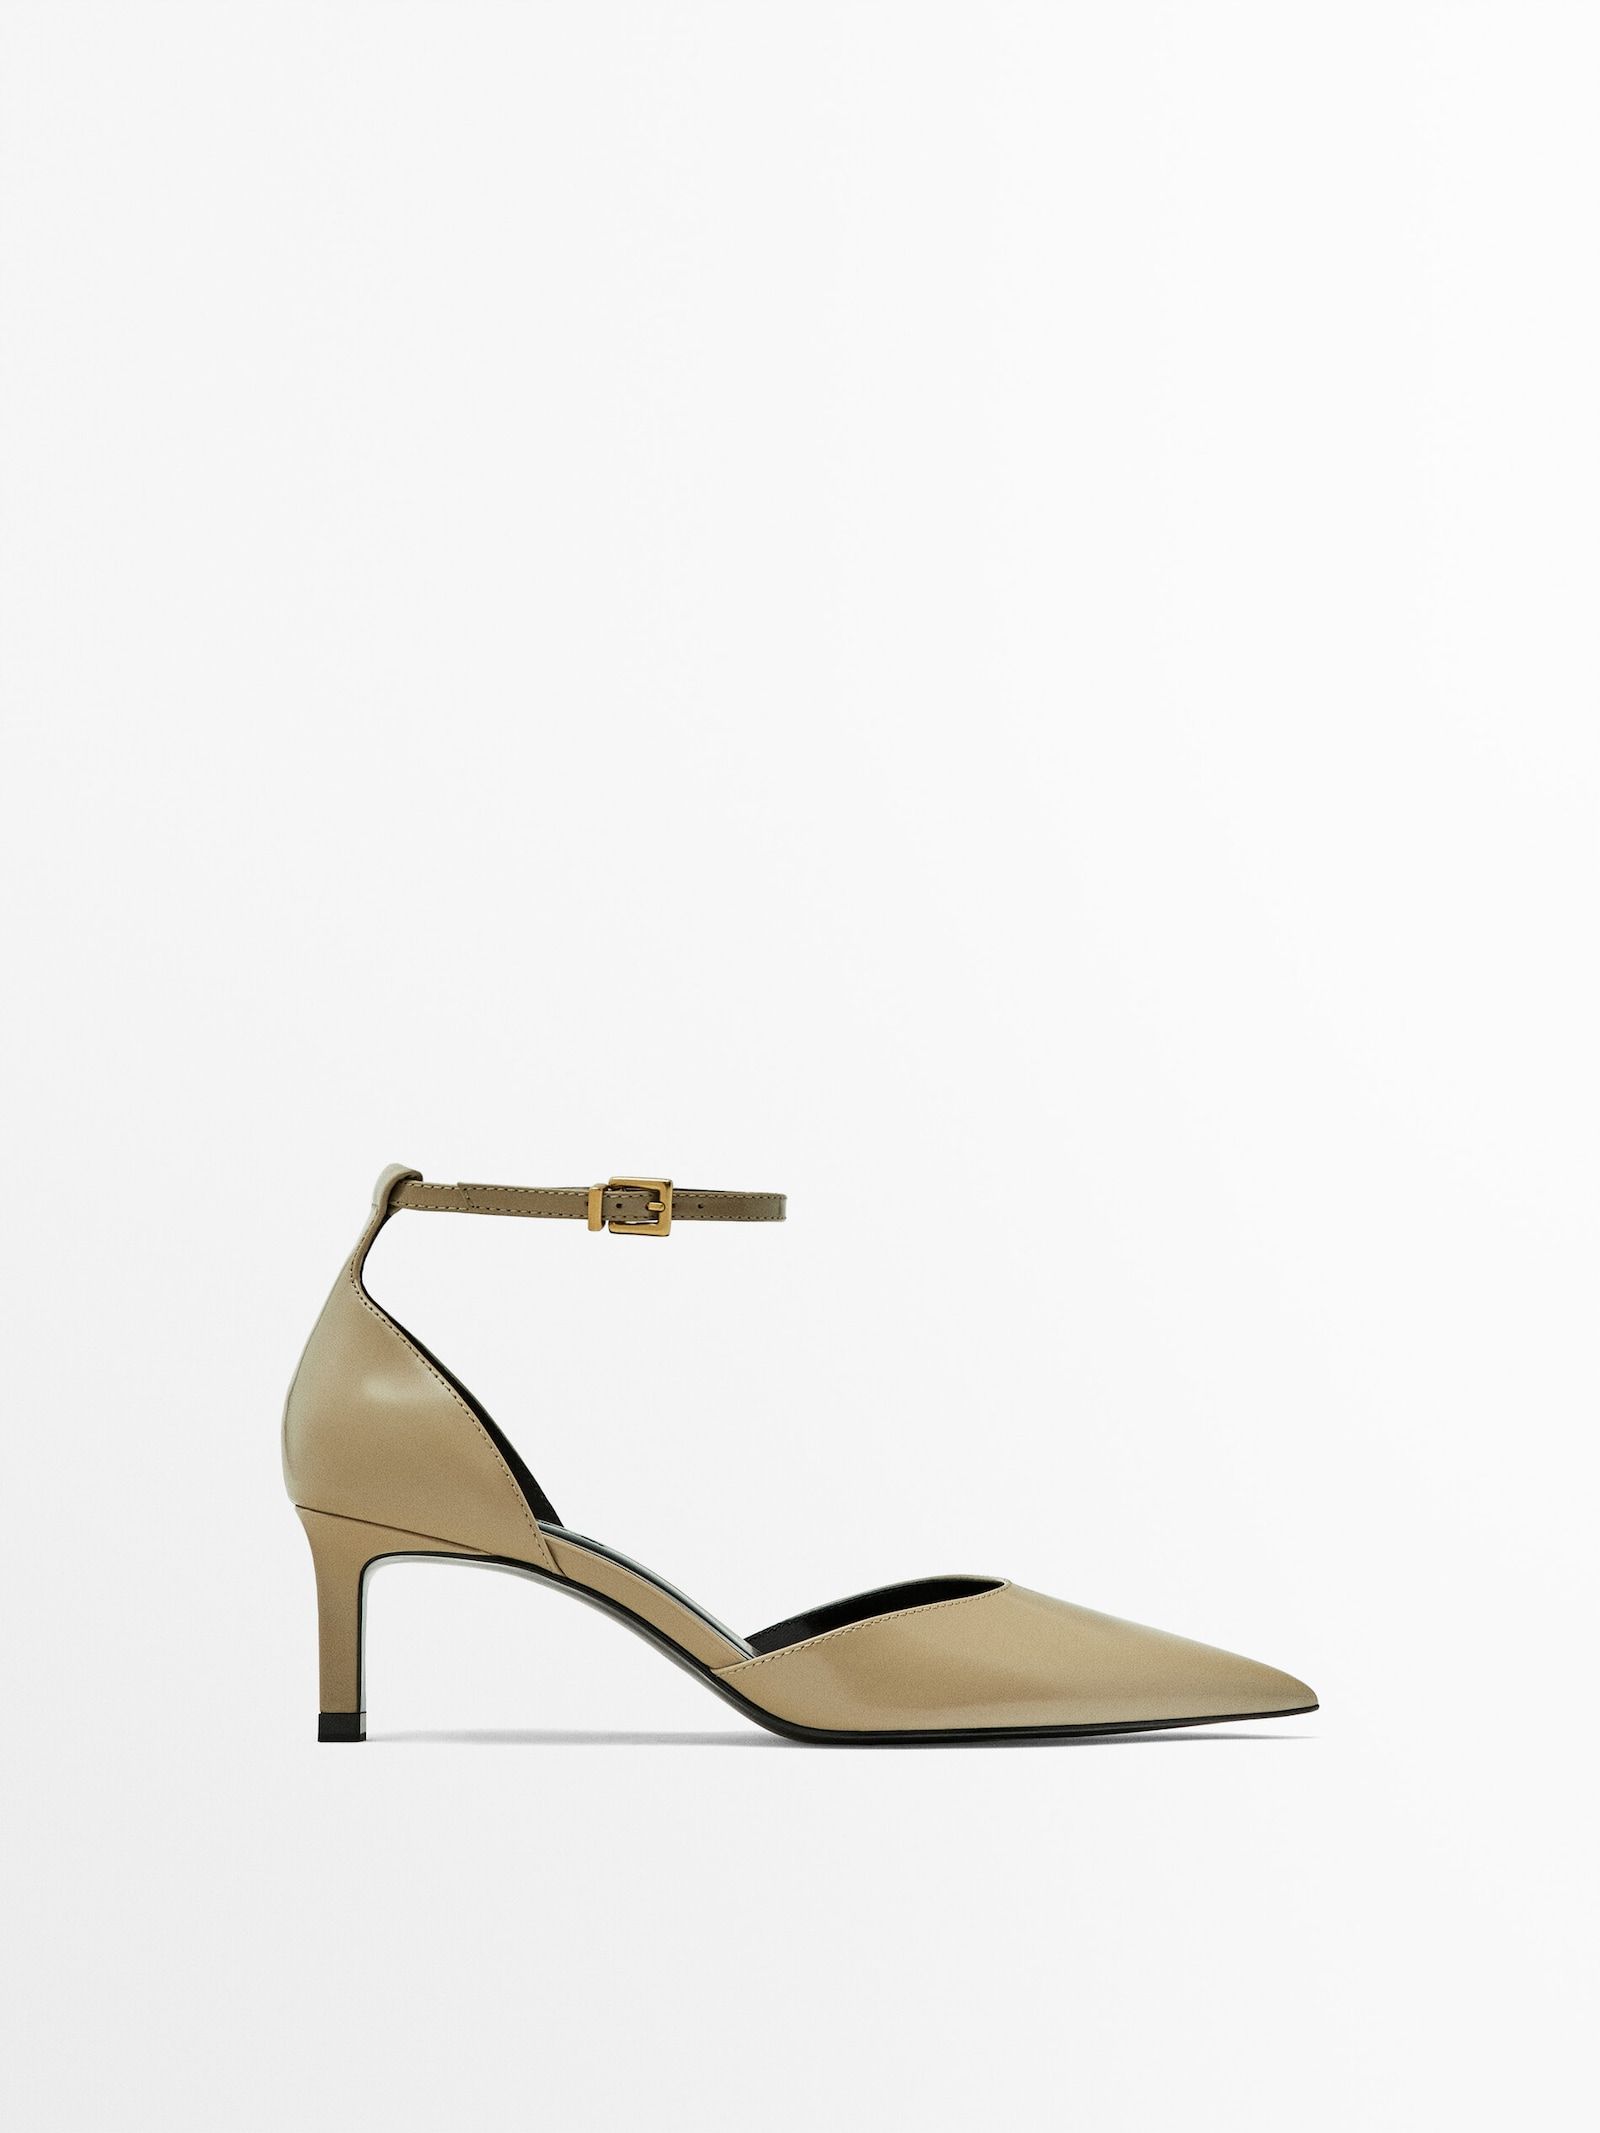 High-heel shoes with ankle straps | Massimo Dutti UK